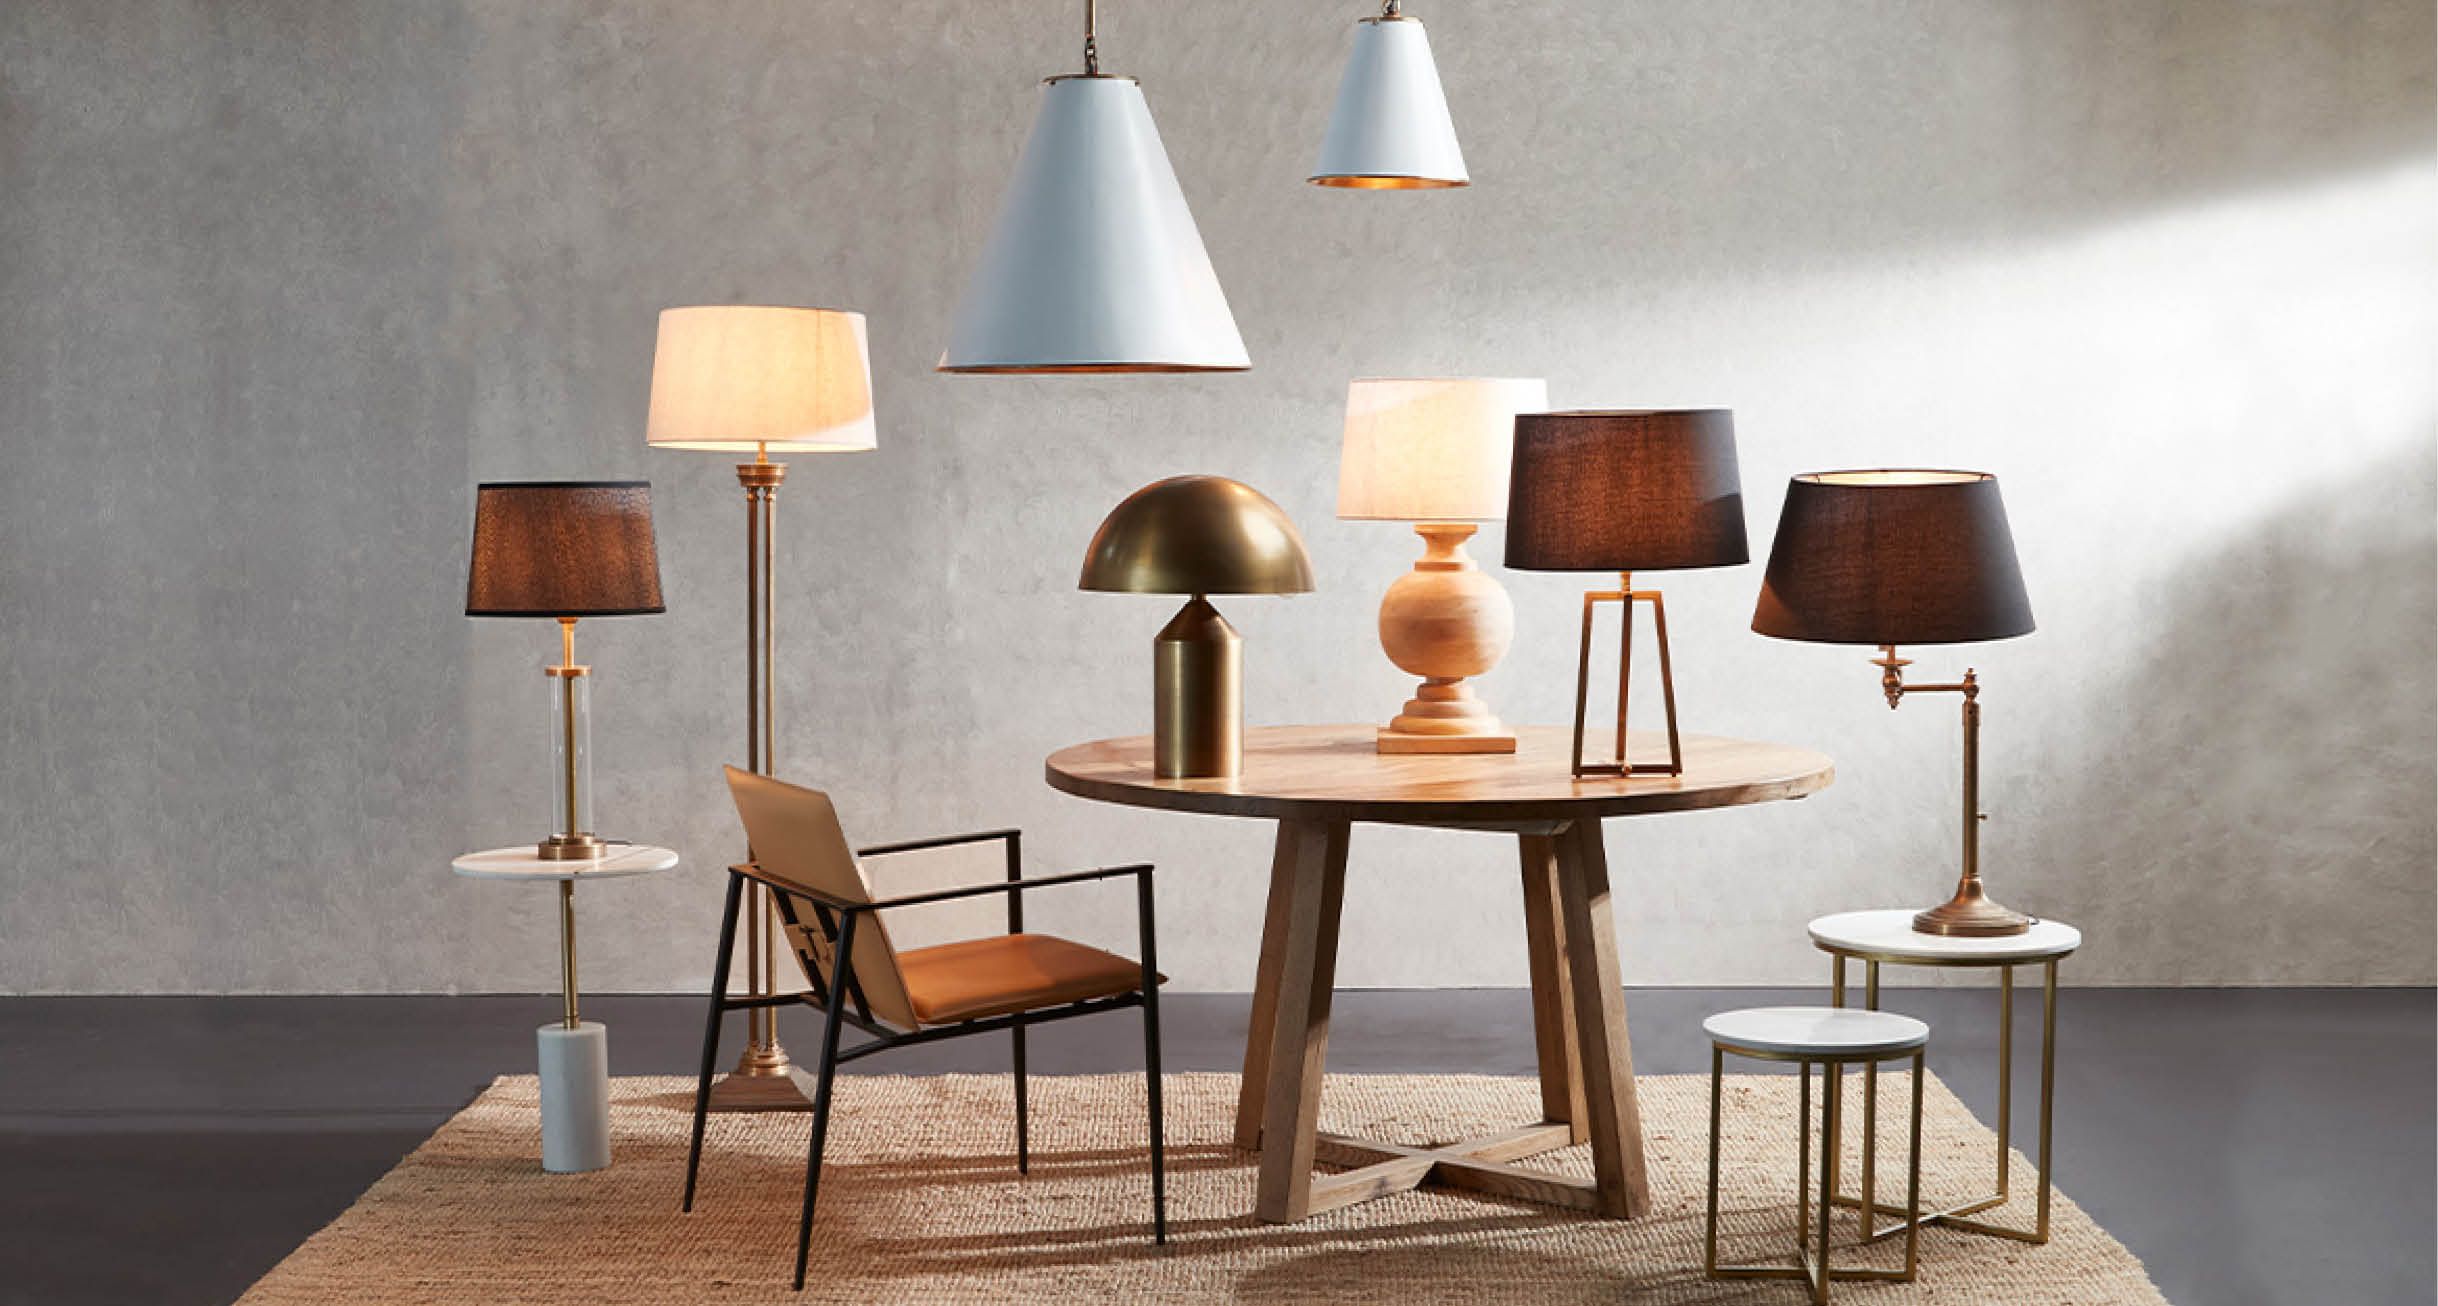 TABLE LAMPS<br><span>View the Range</span>